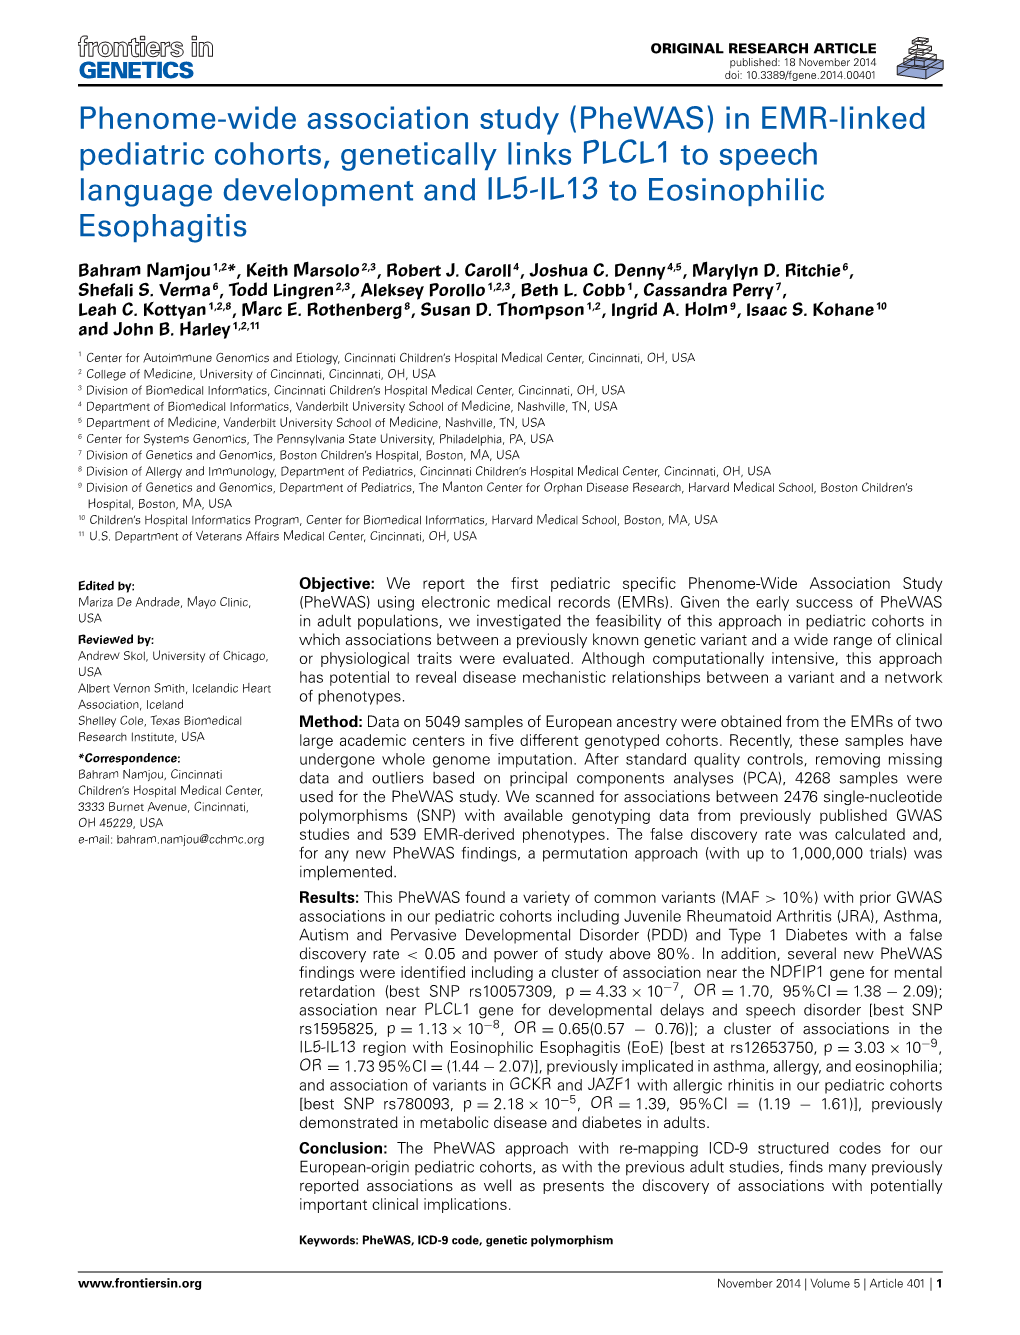 Phewas) in EMR-Linked Pediatric Cohorts, Genetically Links PLCL1 to Speech Language Development and IL5-IL13 to Eosinophilic Esophagitis